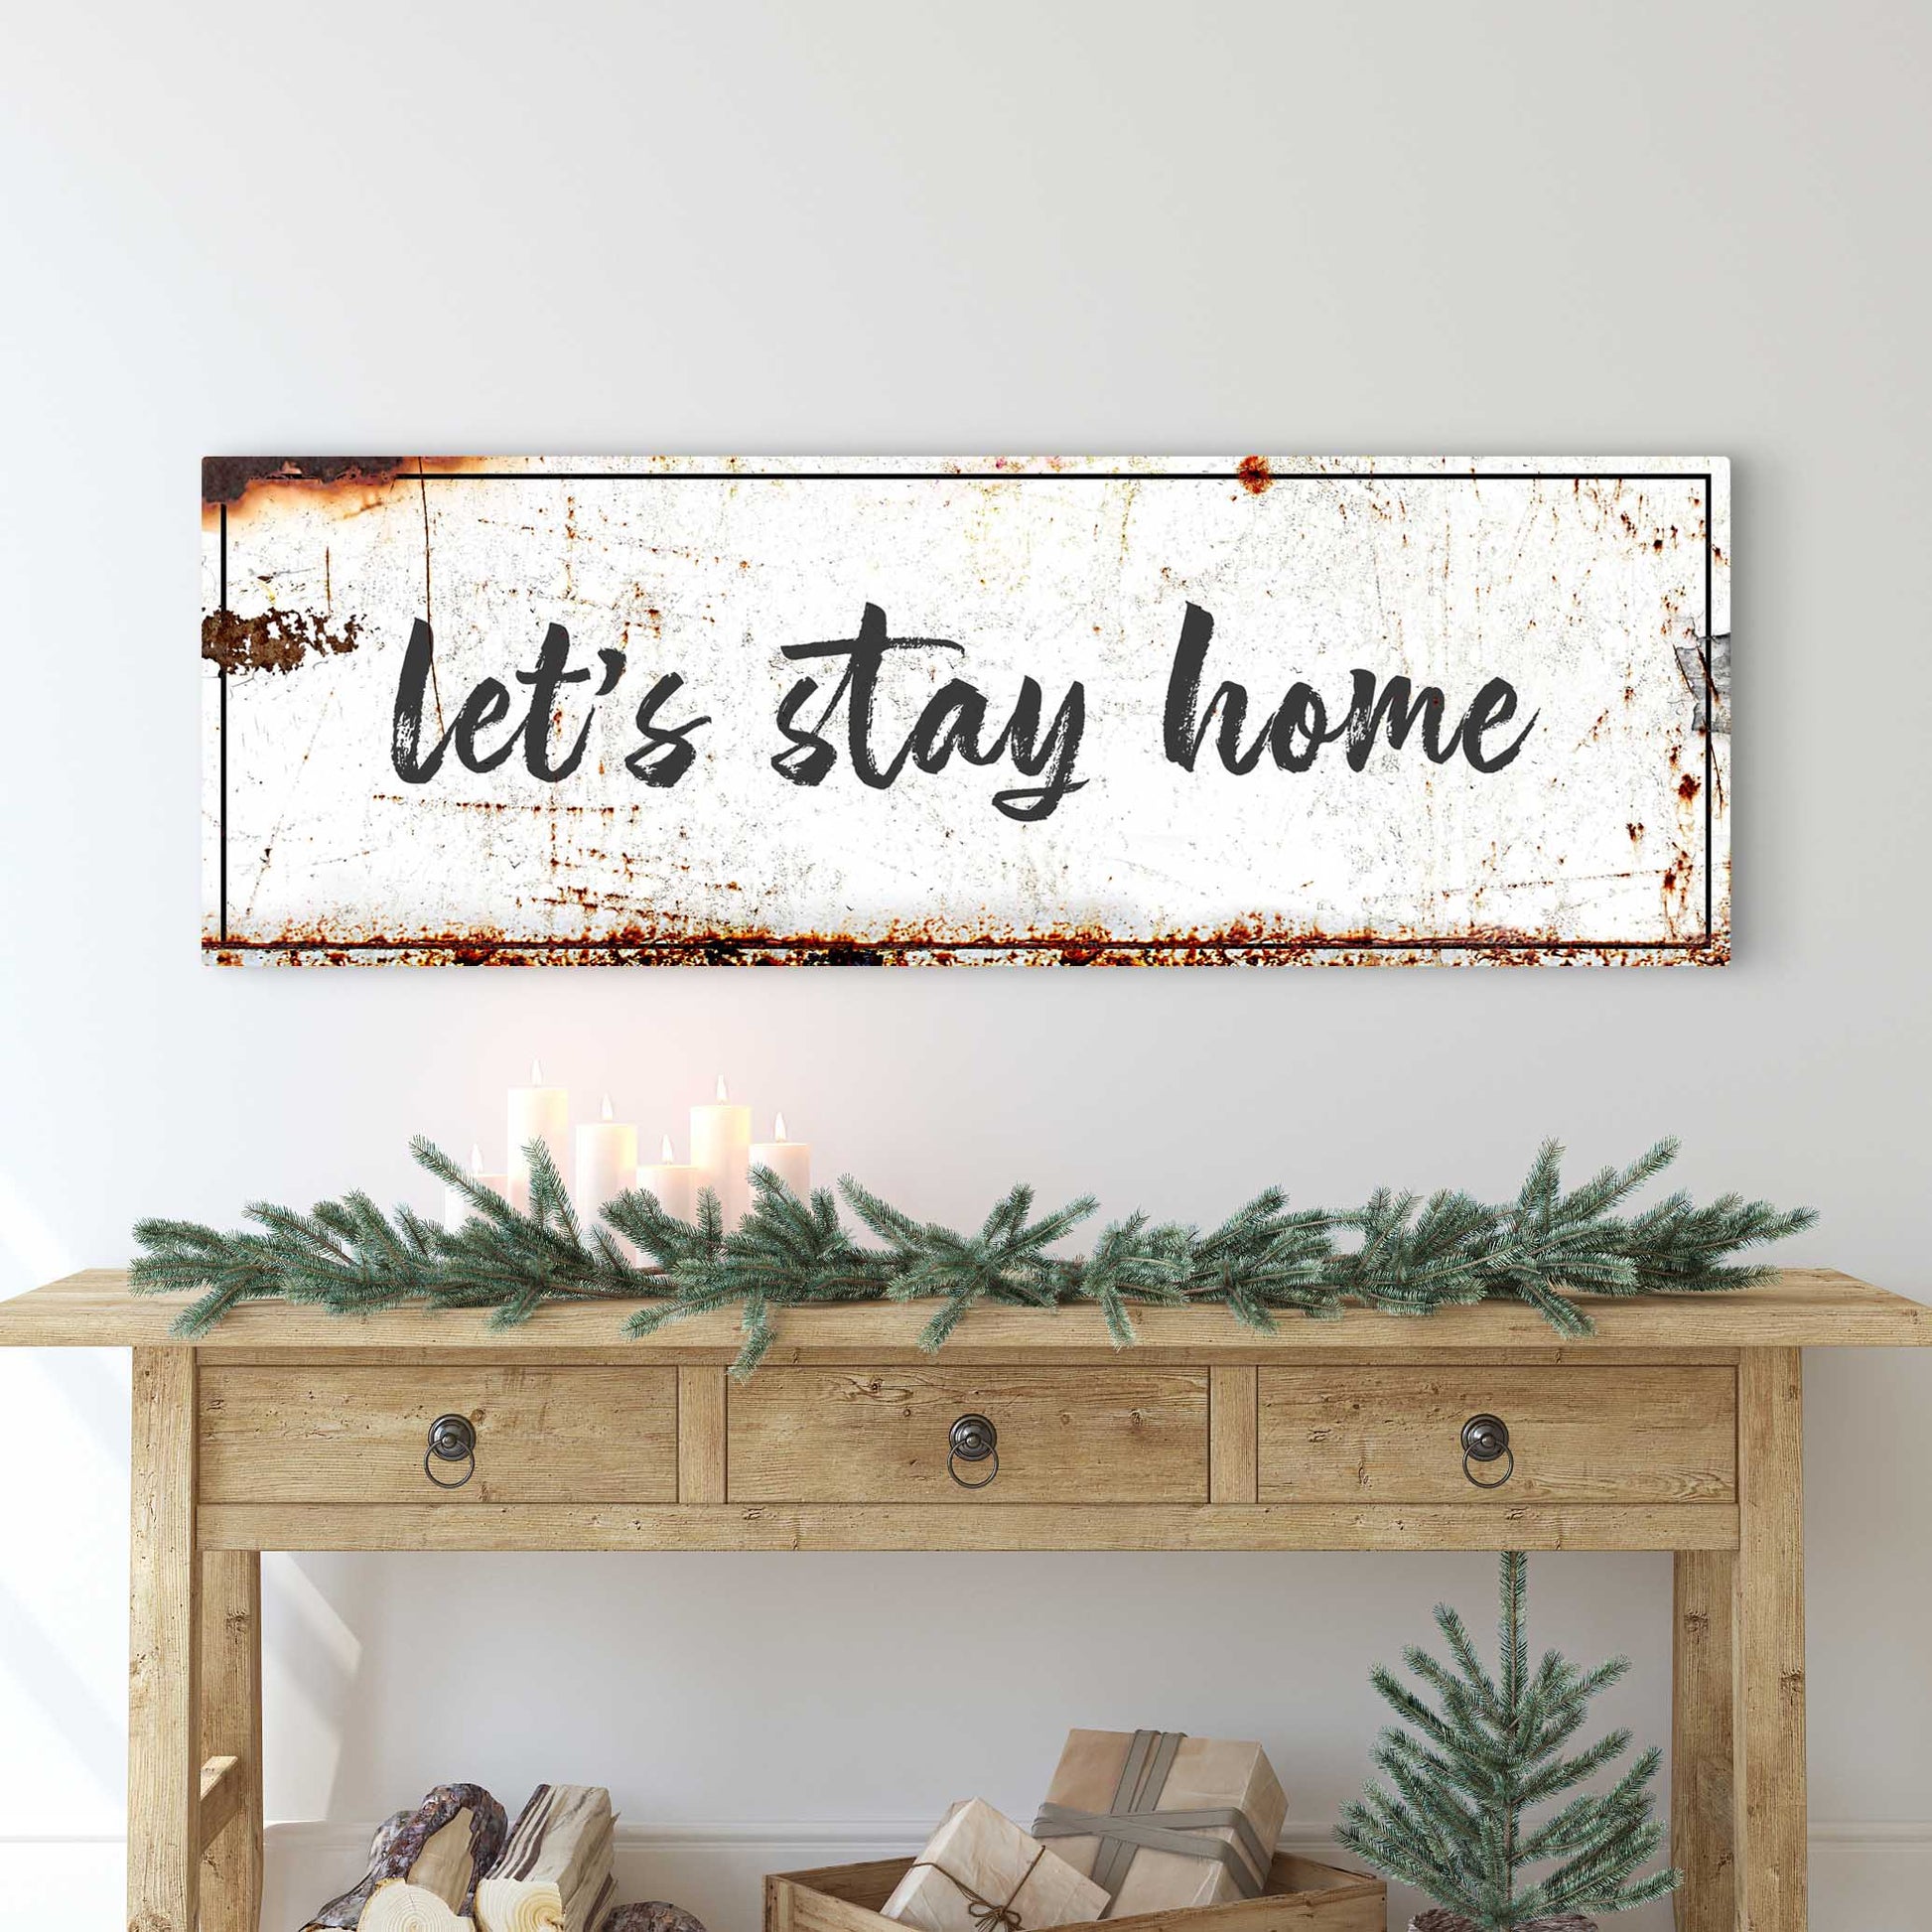 Let's Stay Home Rustic Sign - Image by Tailored Canvases